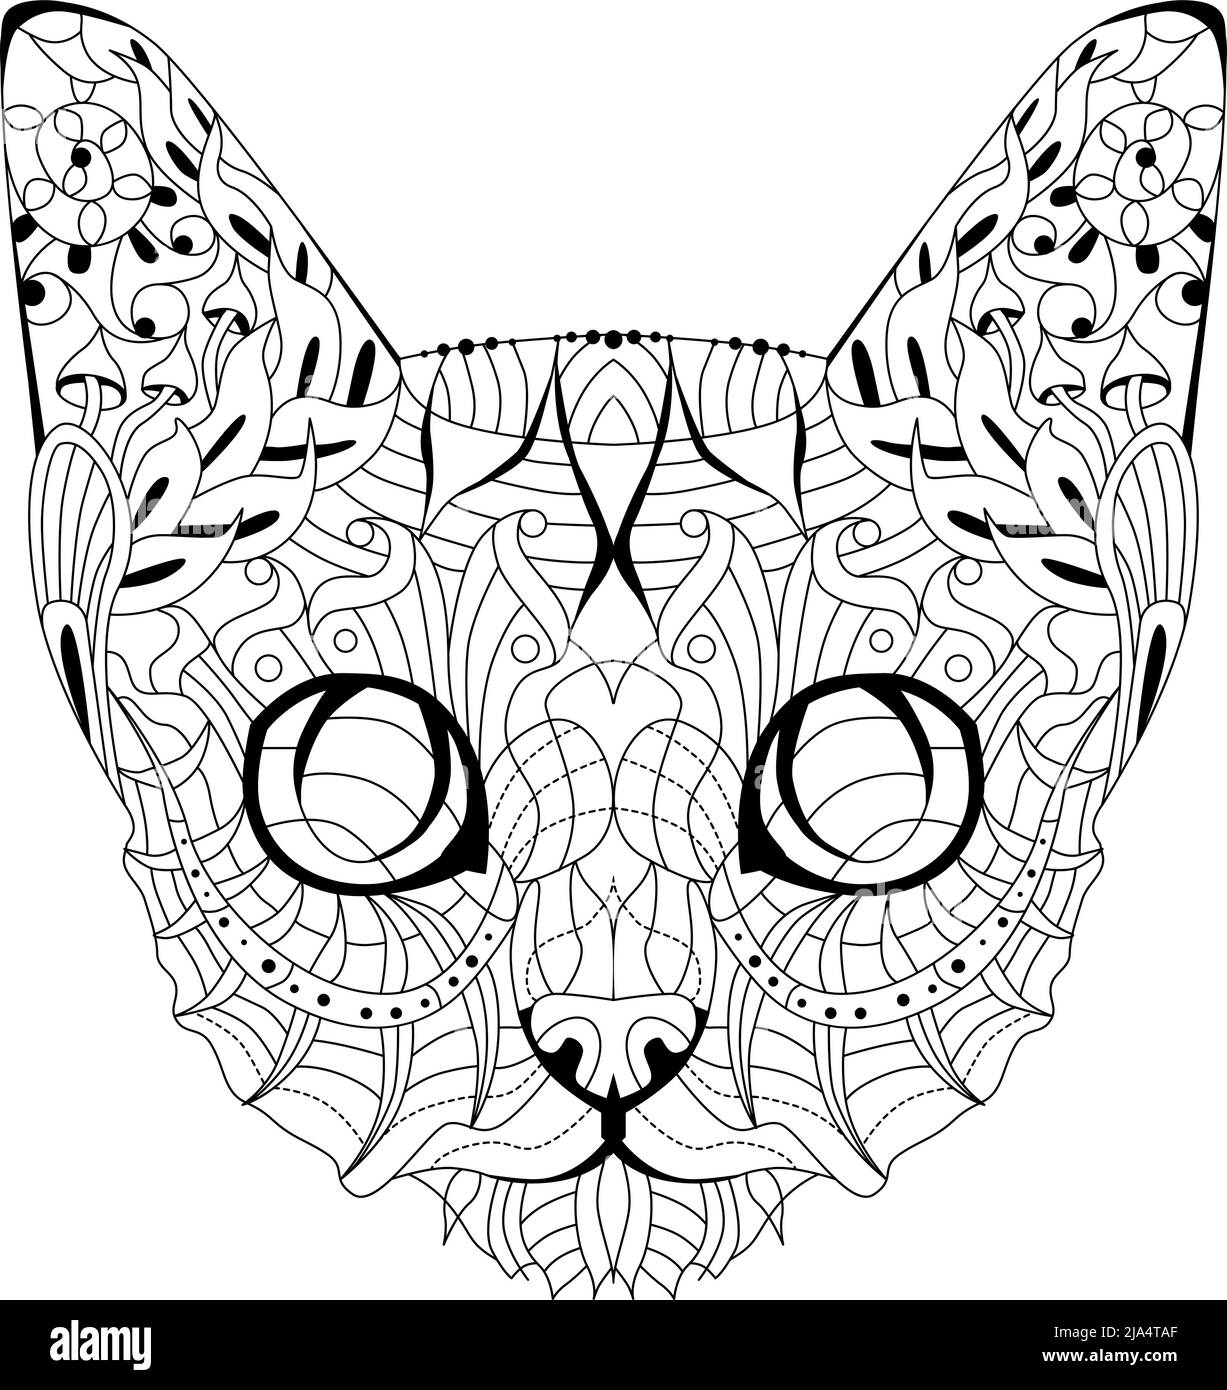 Head of cat zentangle styled with clean lines for coloring book for anti stress, t-shirt design, tattoo and other decorations Stock Vector